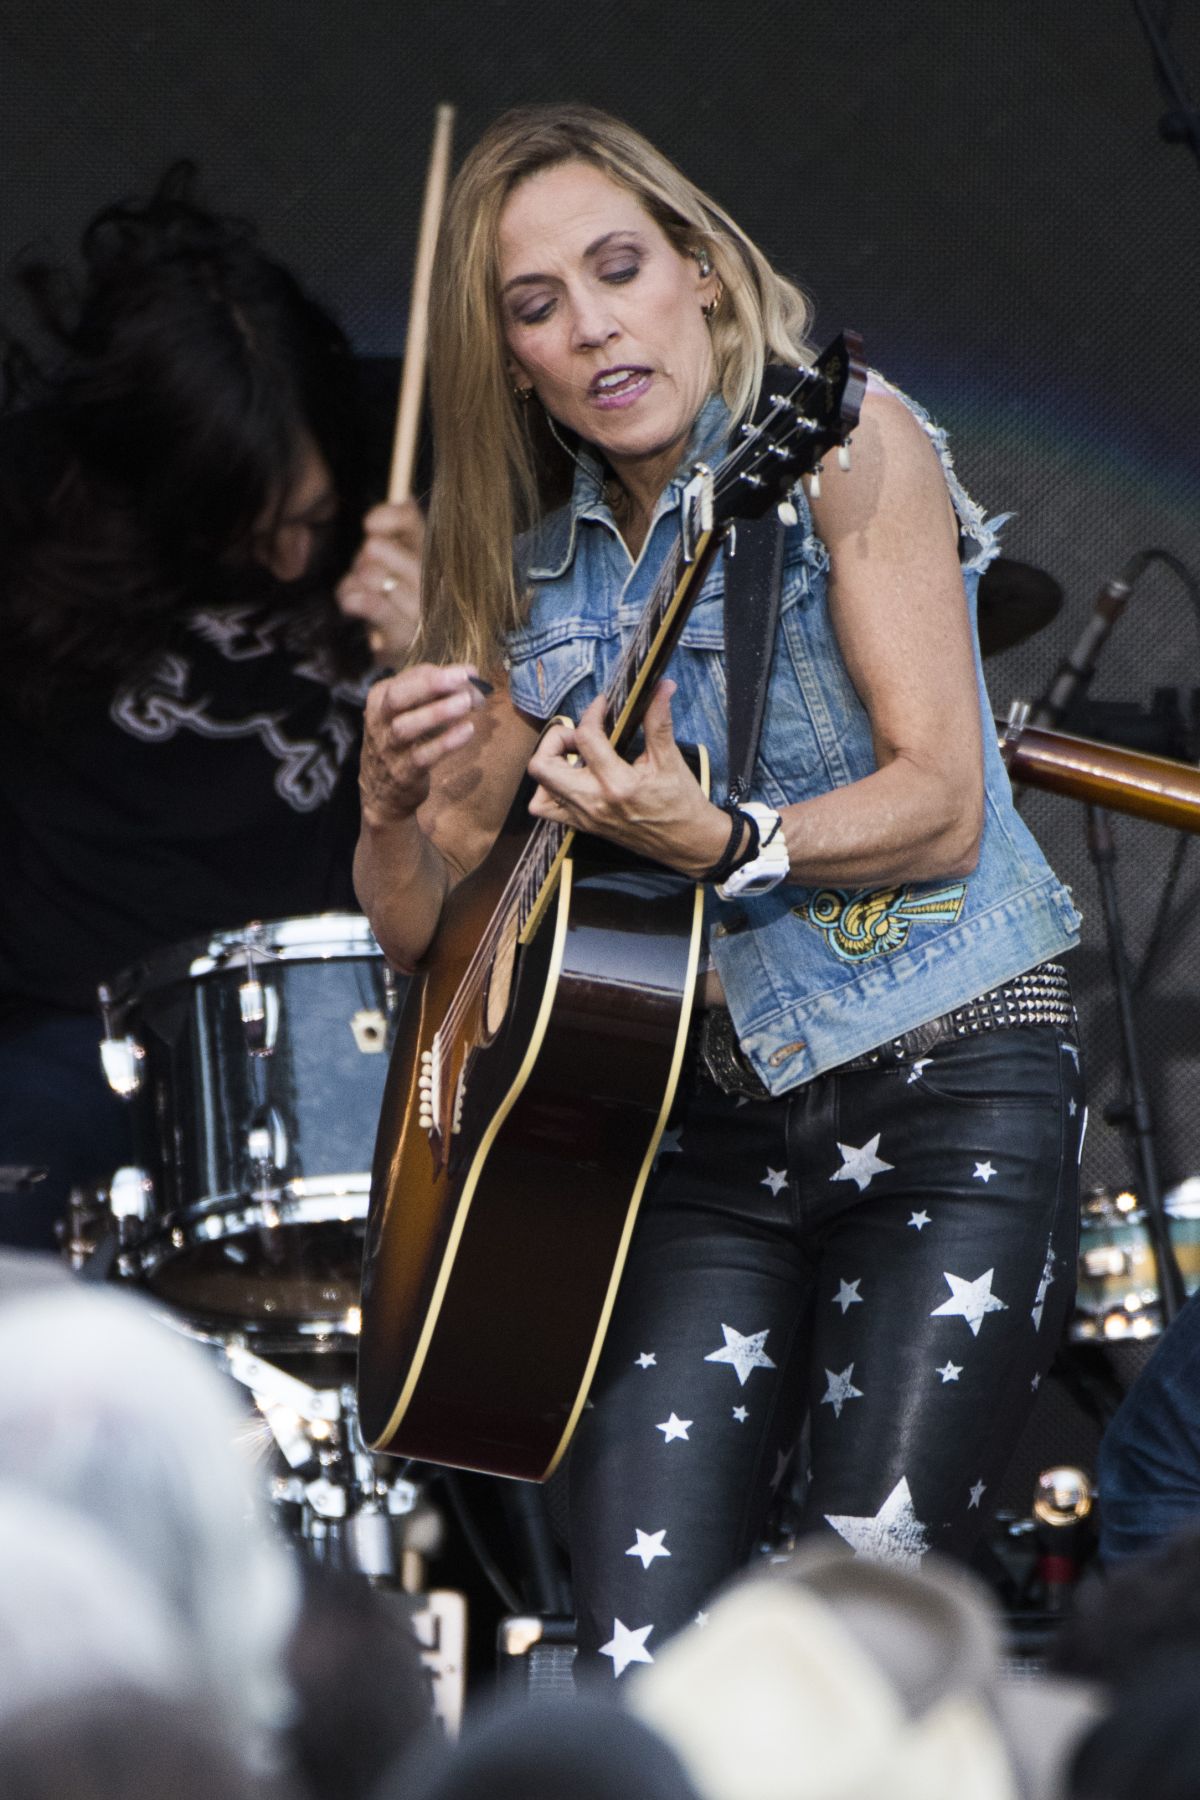 SHERYL CROW Performs at a Concert in Calgary 07/11/2018 – HawtCelebs